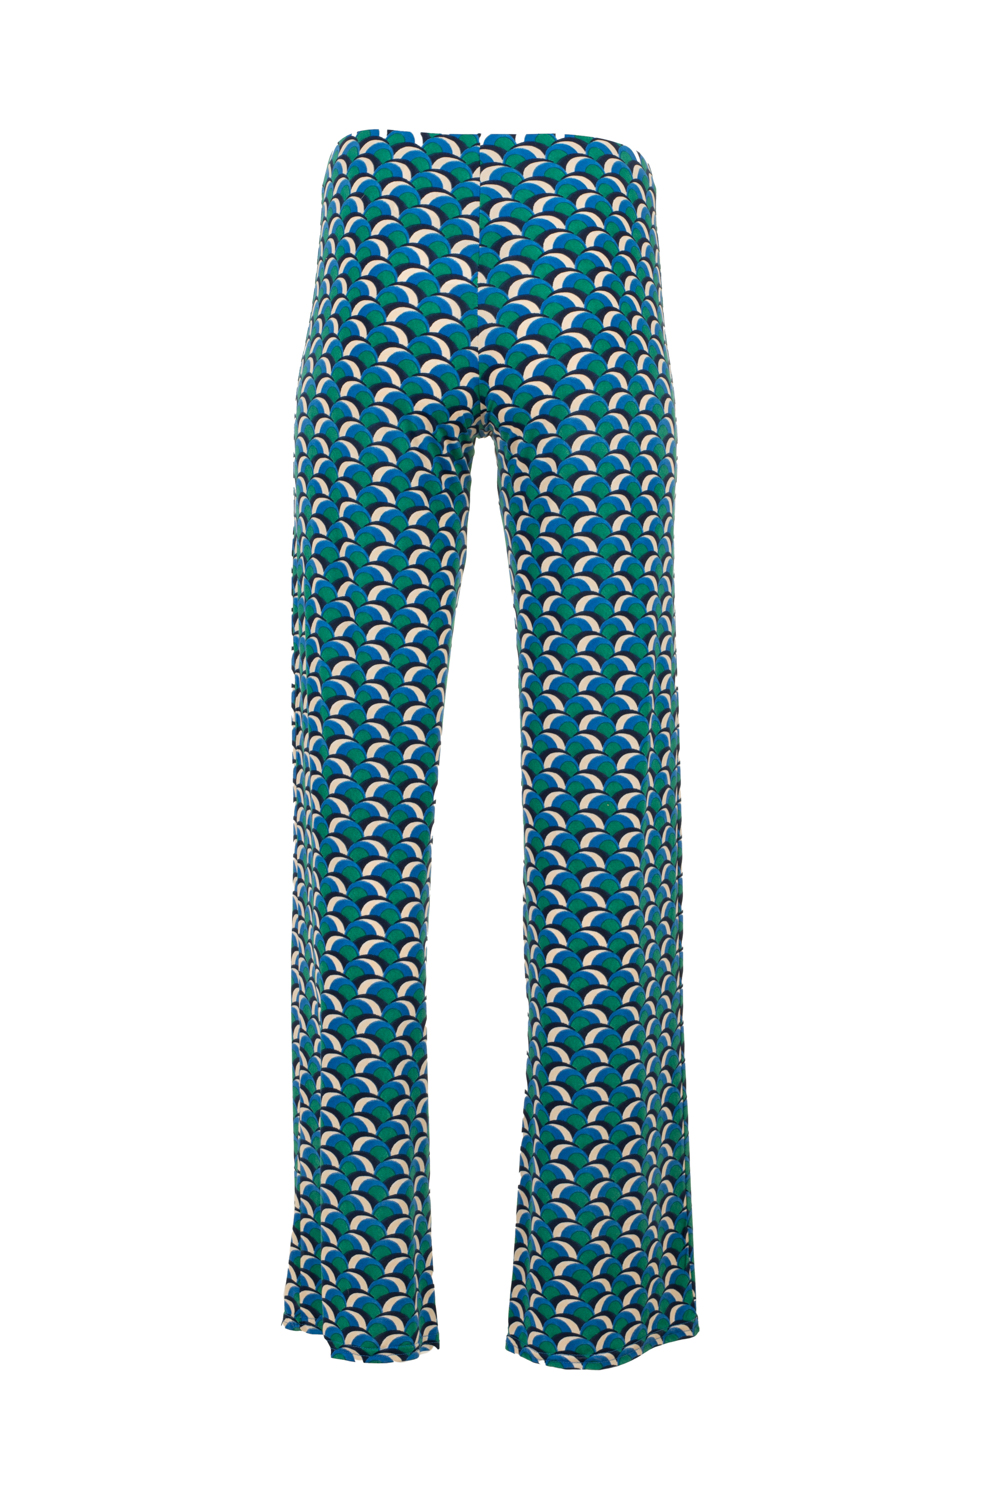 Printed Soft Trousers with Elasticated Waistband